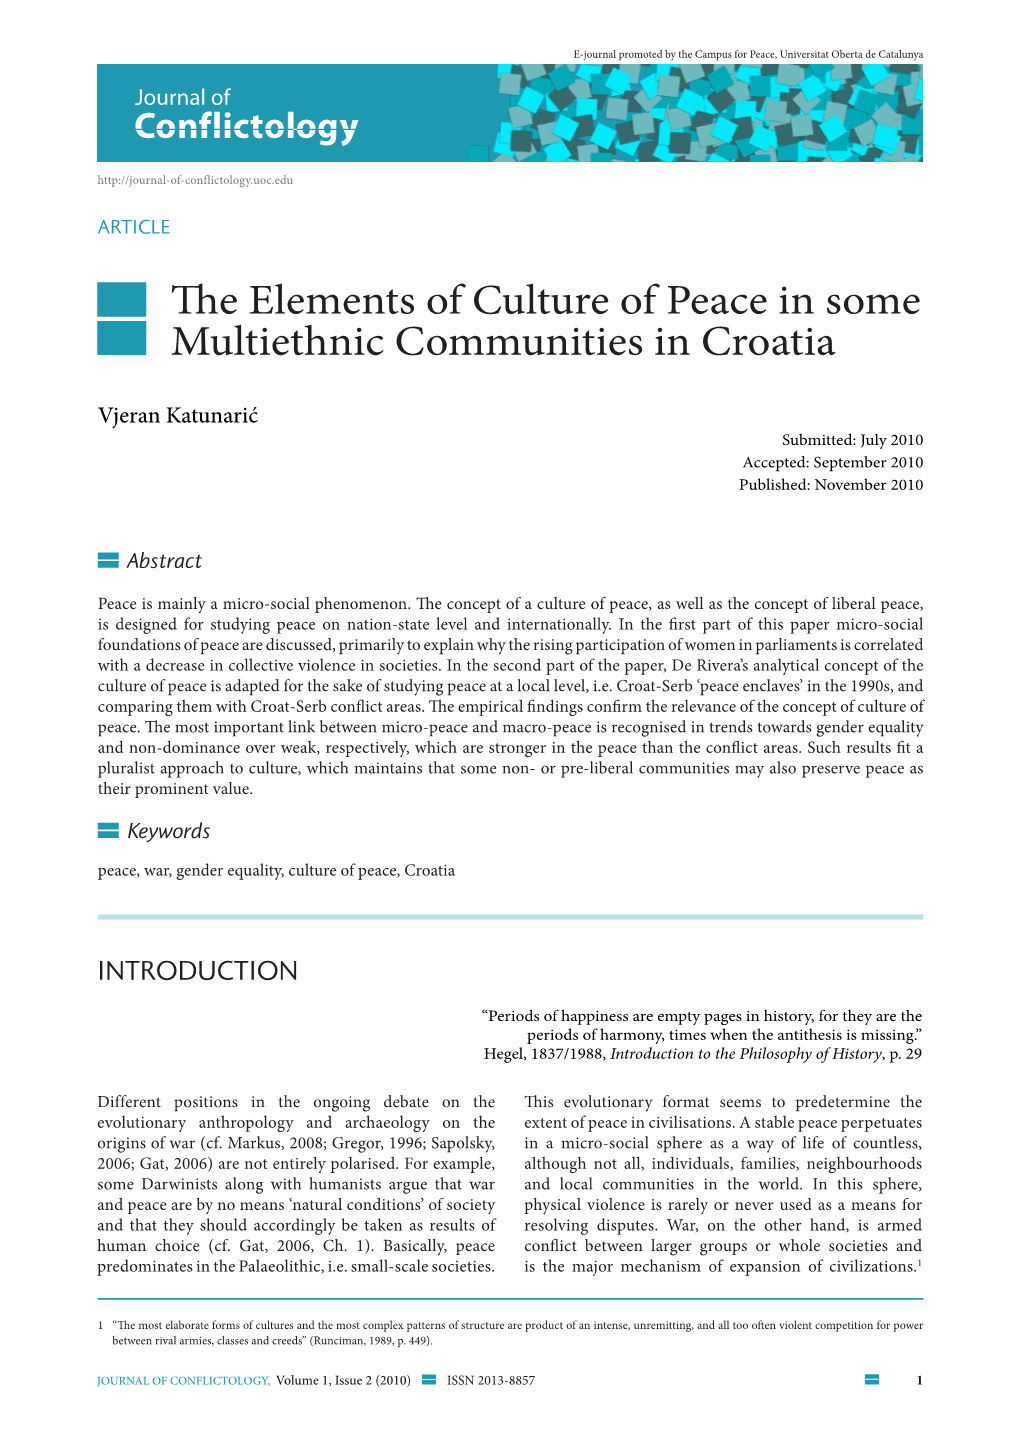 The Elements of Culture of Peace in Some Multiethnic Communities in Croatia